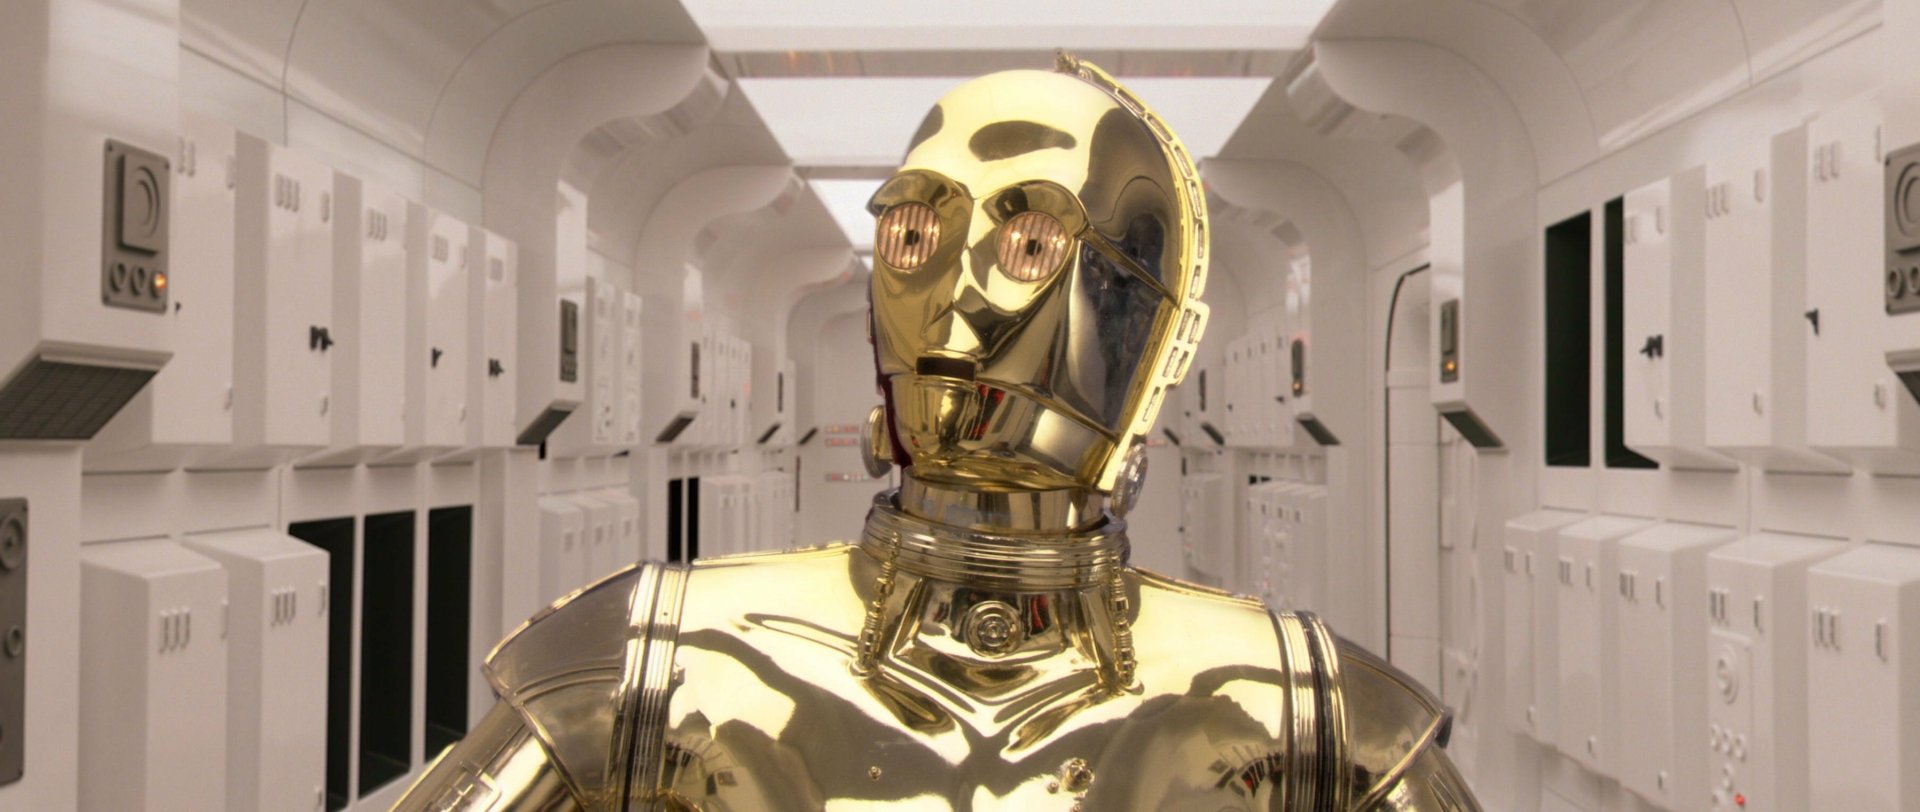 C-3PO is a droid programmed for etiquette and protocol. Computer